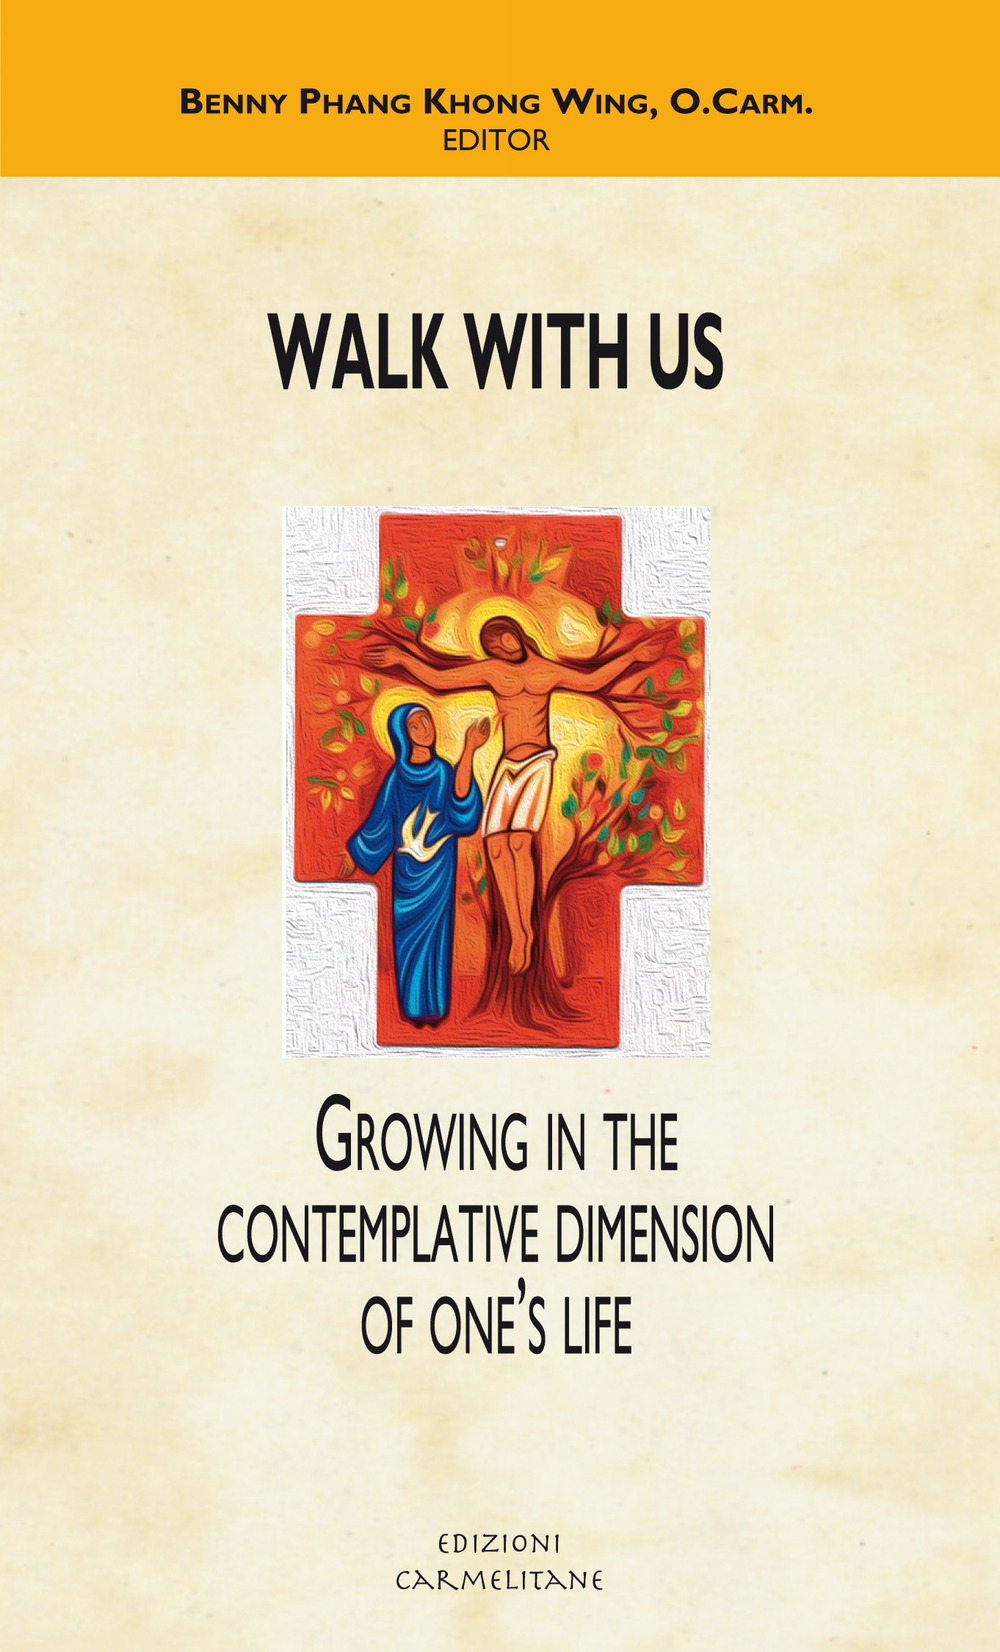 Walk with us. Growing in the contemplative dimension of one's life